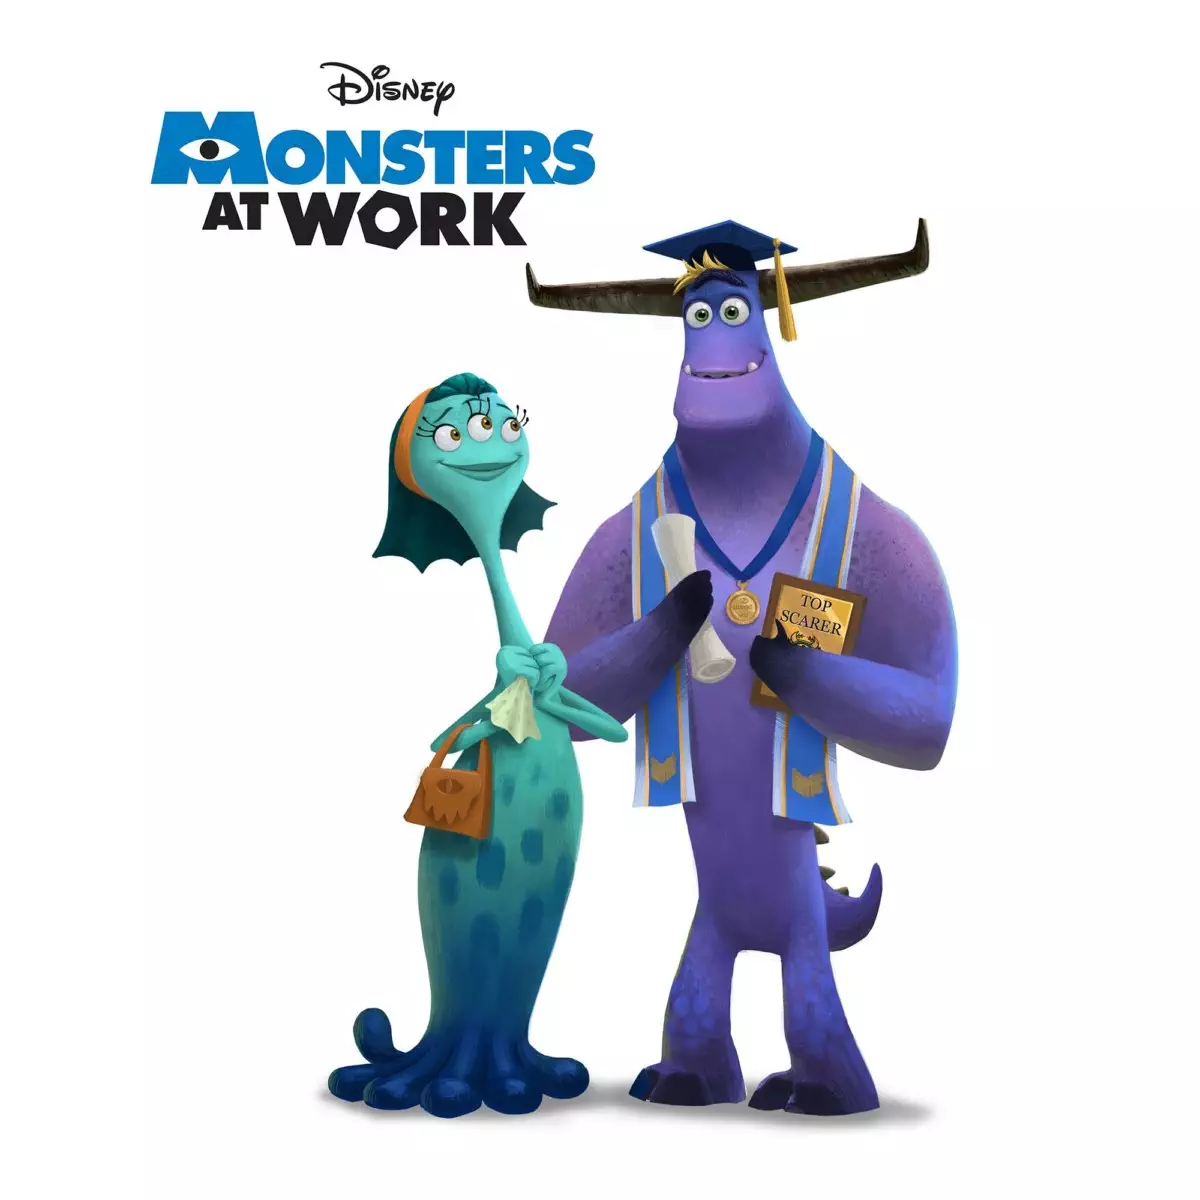 In 'Monsters at Work,' the Scary Part Is the New Business Model